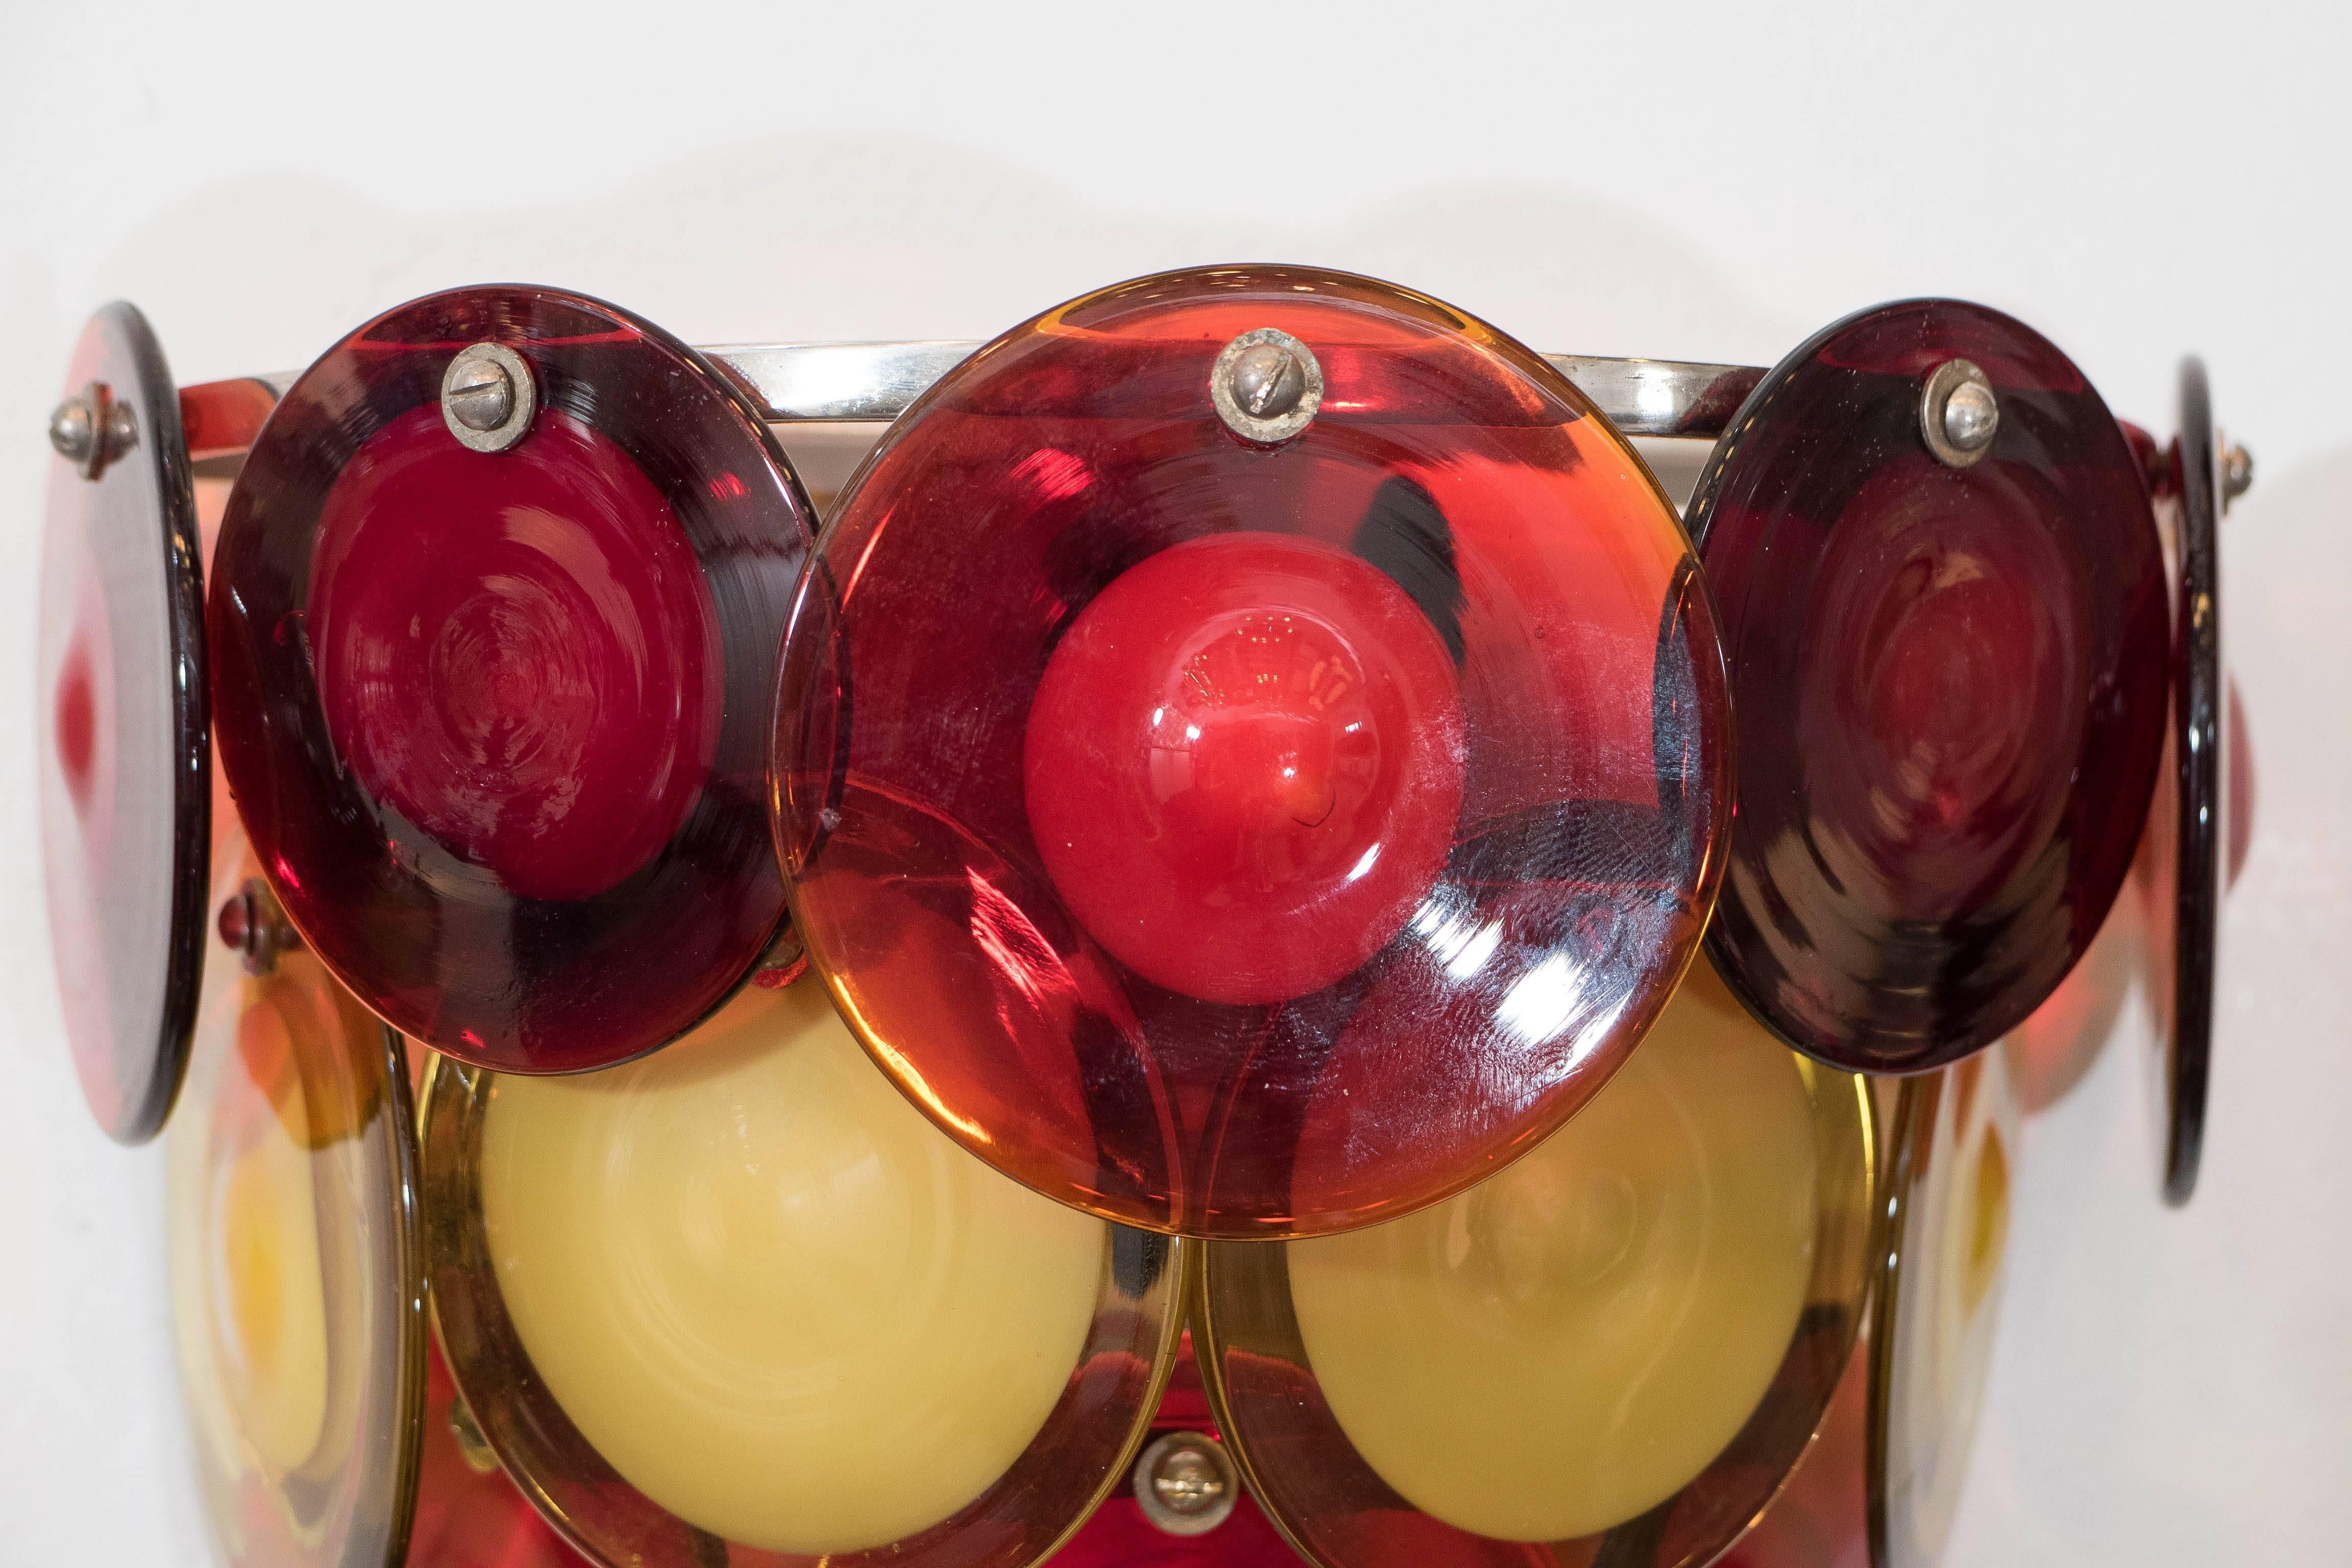 A pair of vintage sconces, each composed of three tiers of discs in brightly colored Murano glass, suspended from a demilune frame, produced by Vistosi of Italy, circa 1970s. Wiring to US standard. Both fixtures are in very good condition,